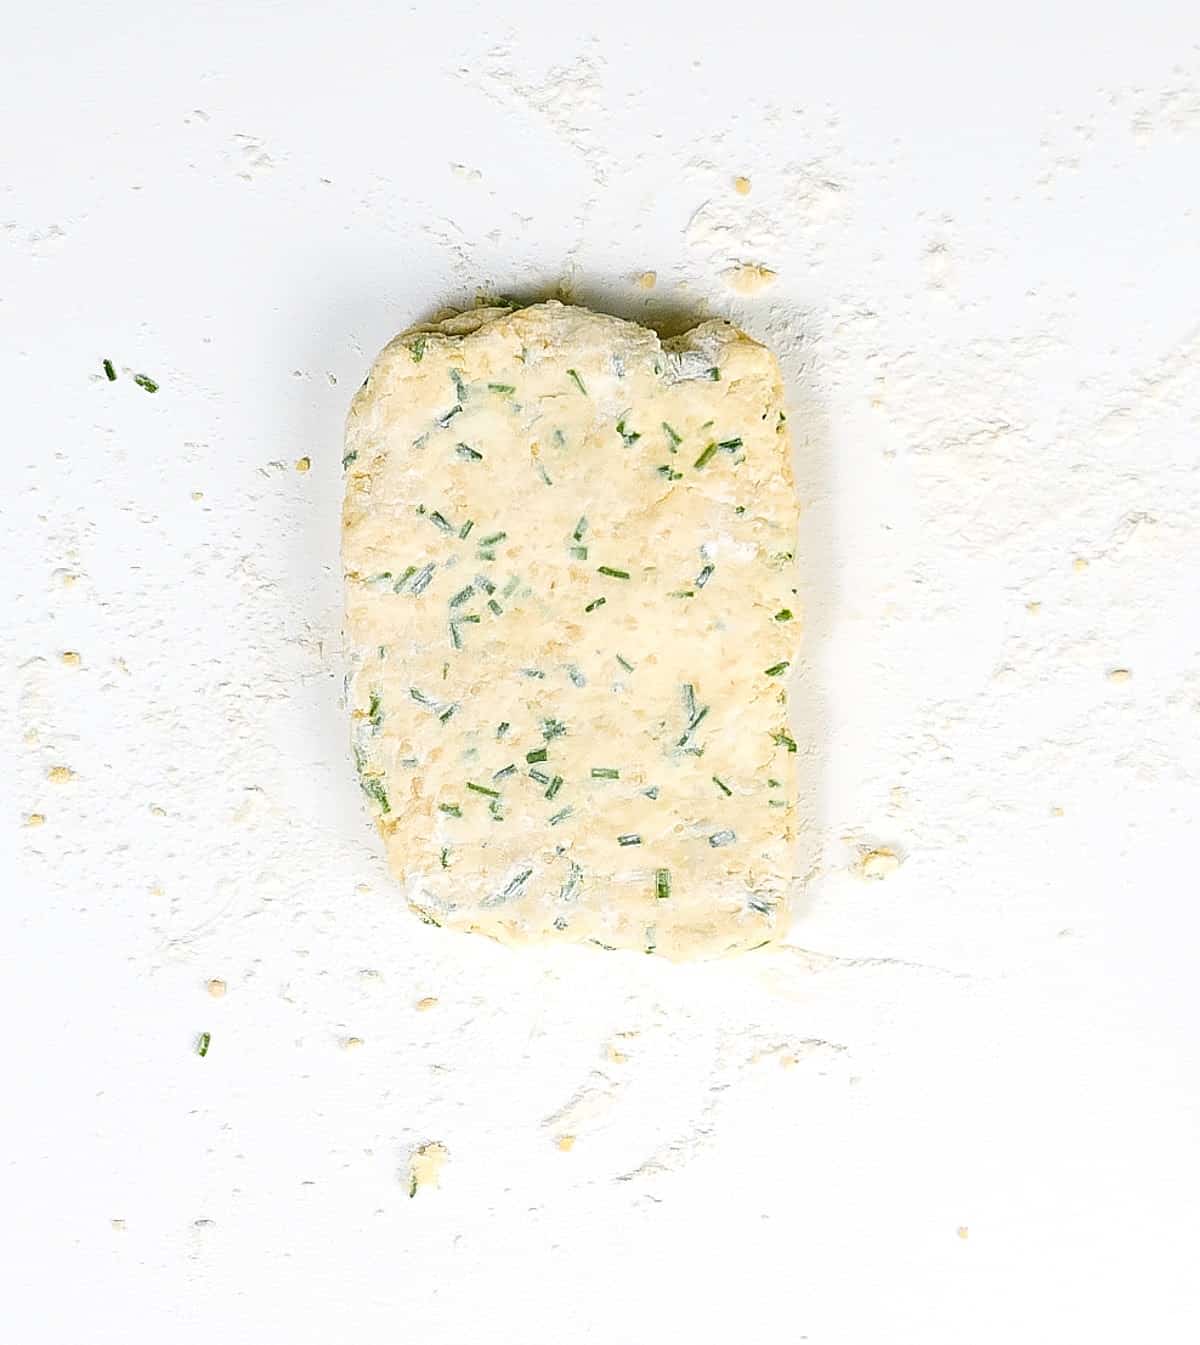 Final scone dough with chives on a floured white surface.